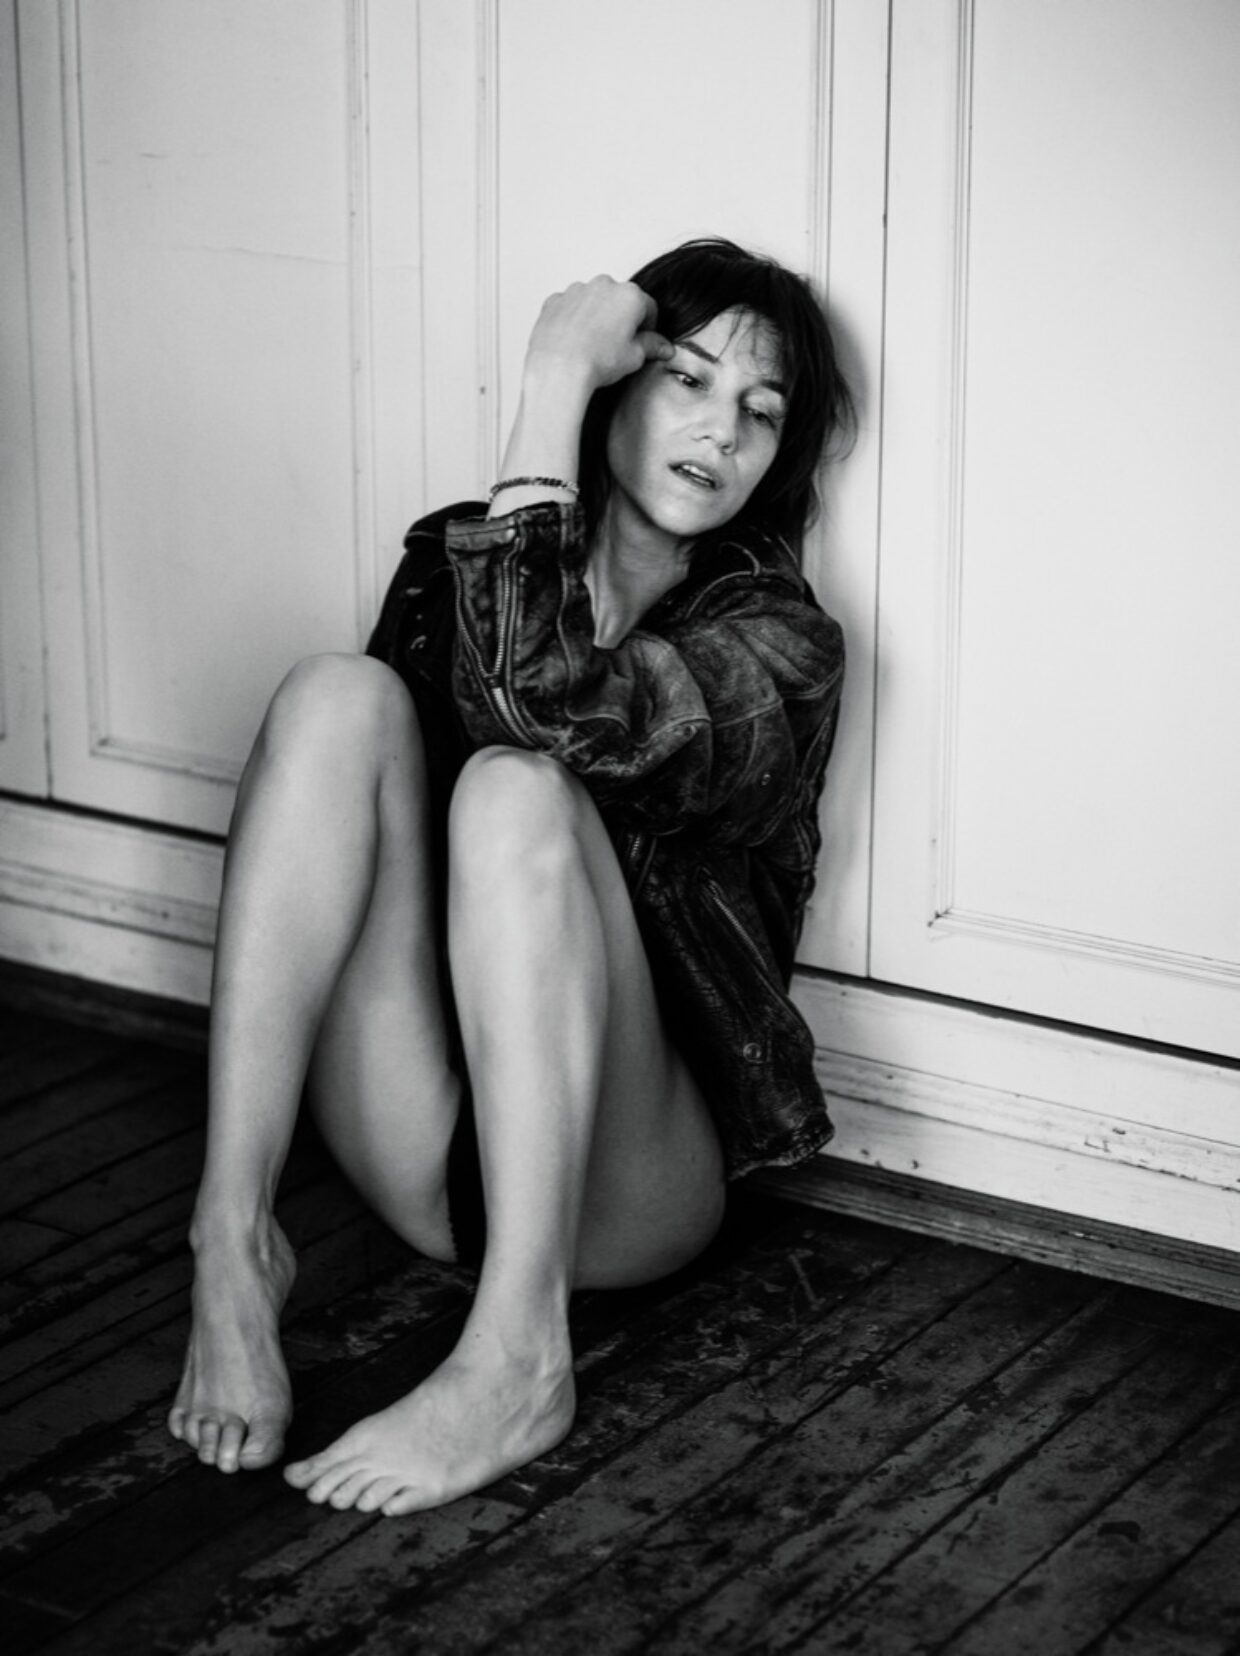 Charlotte Gainsbourg Covers Interview Magazine in the “Queens of Cool” Issue | 6